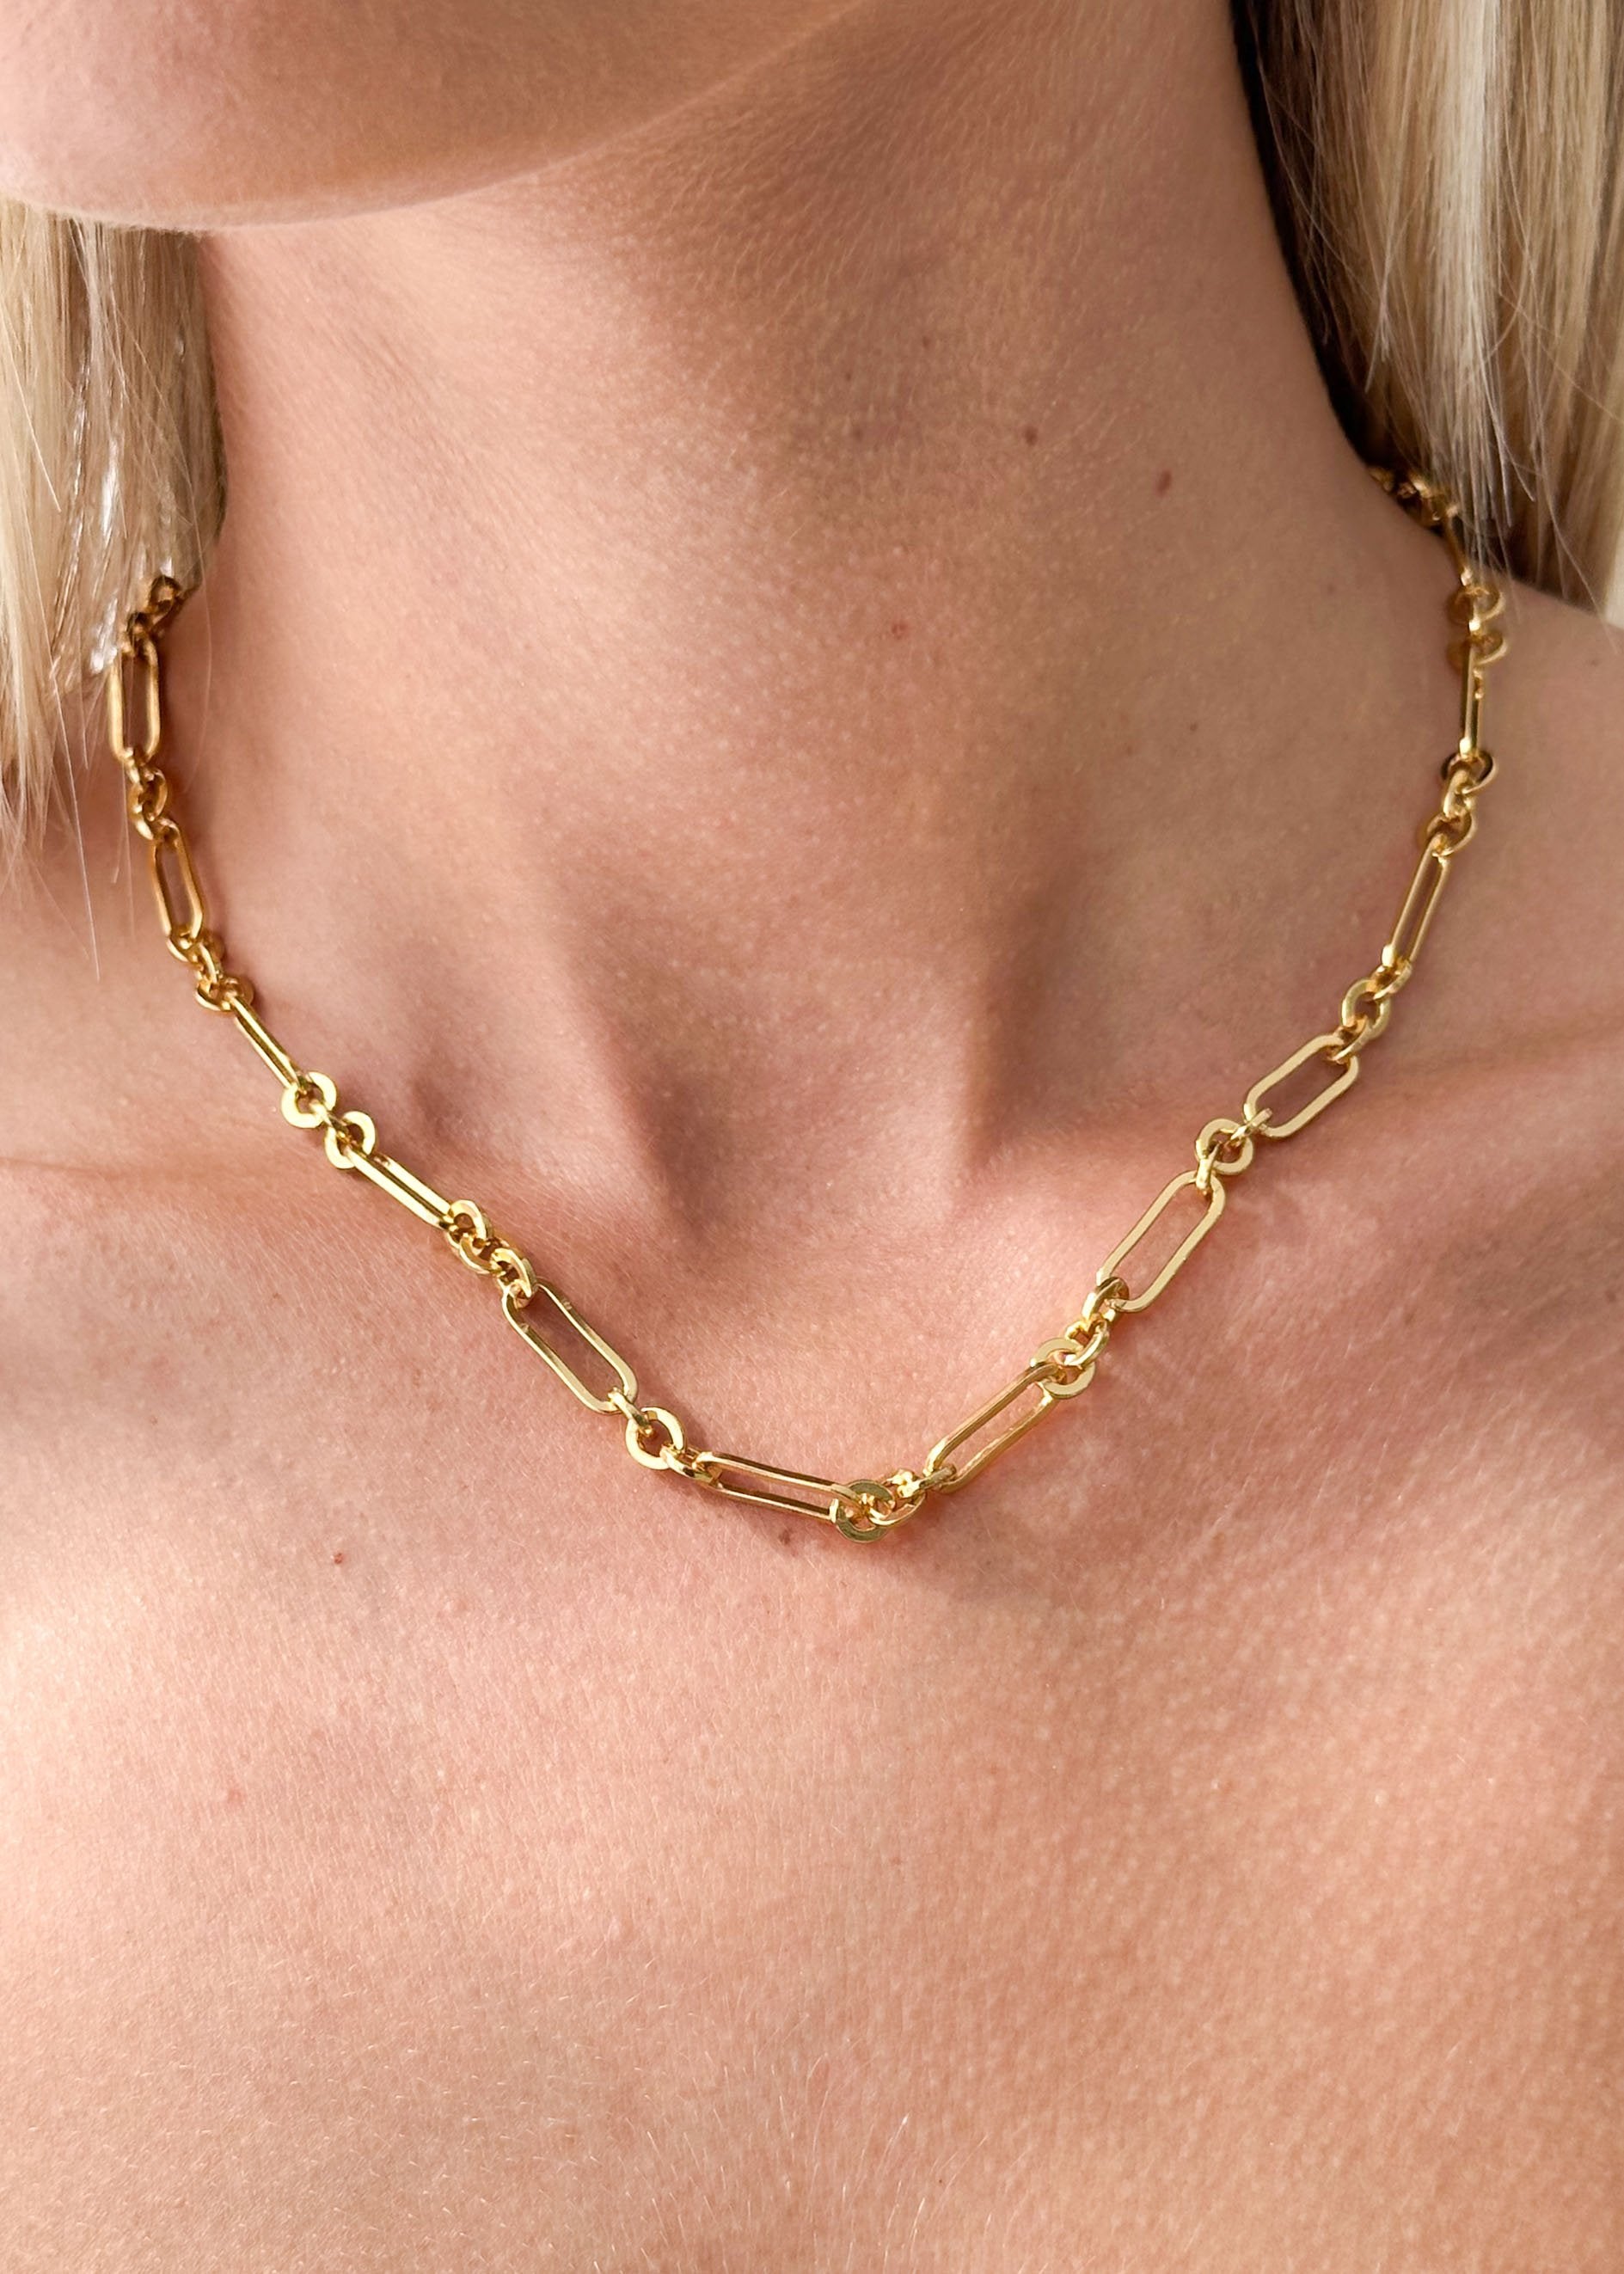 Kaylean Necklace - Gold